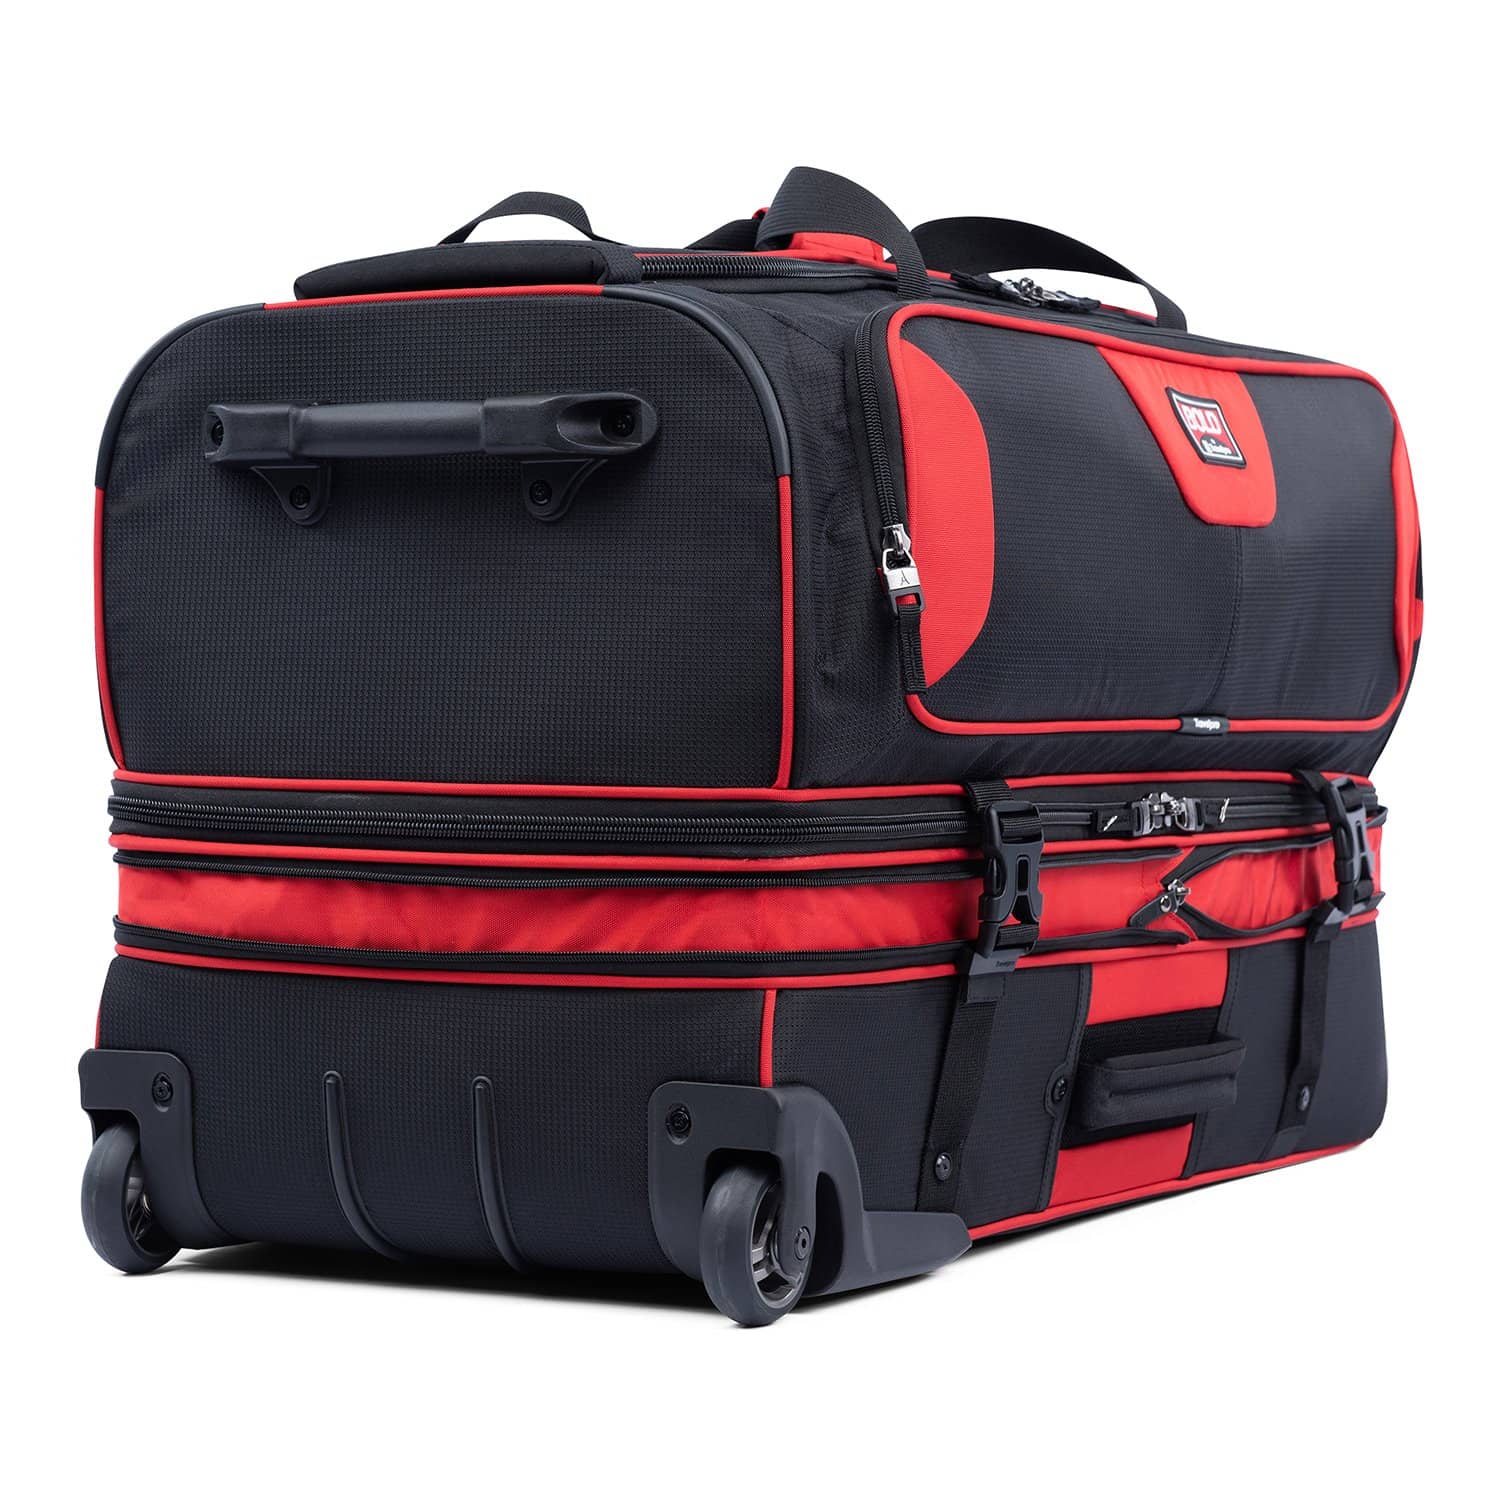 Bold by Travelpro 30" Drop Bottom Rolling Duffel – Luggage Pros